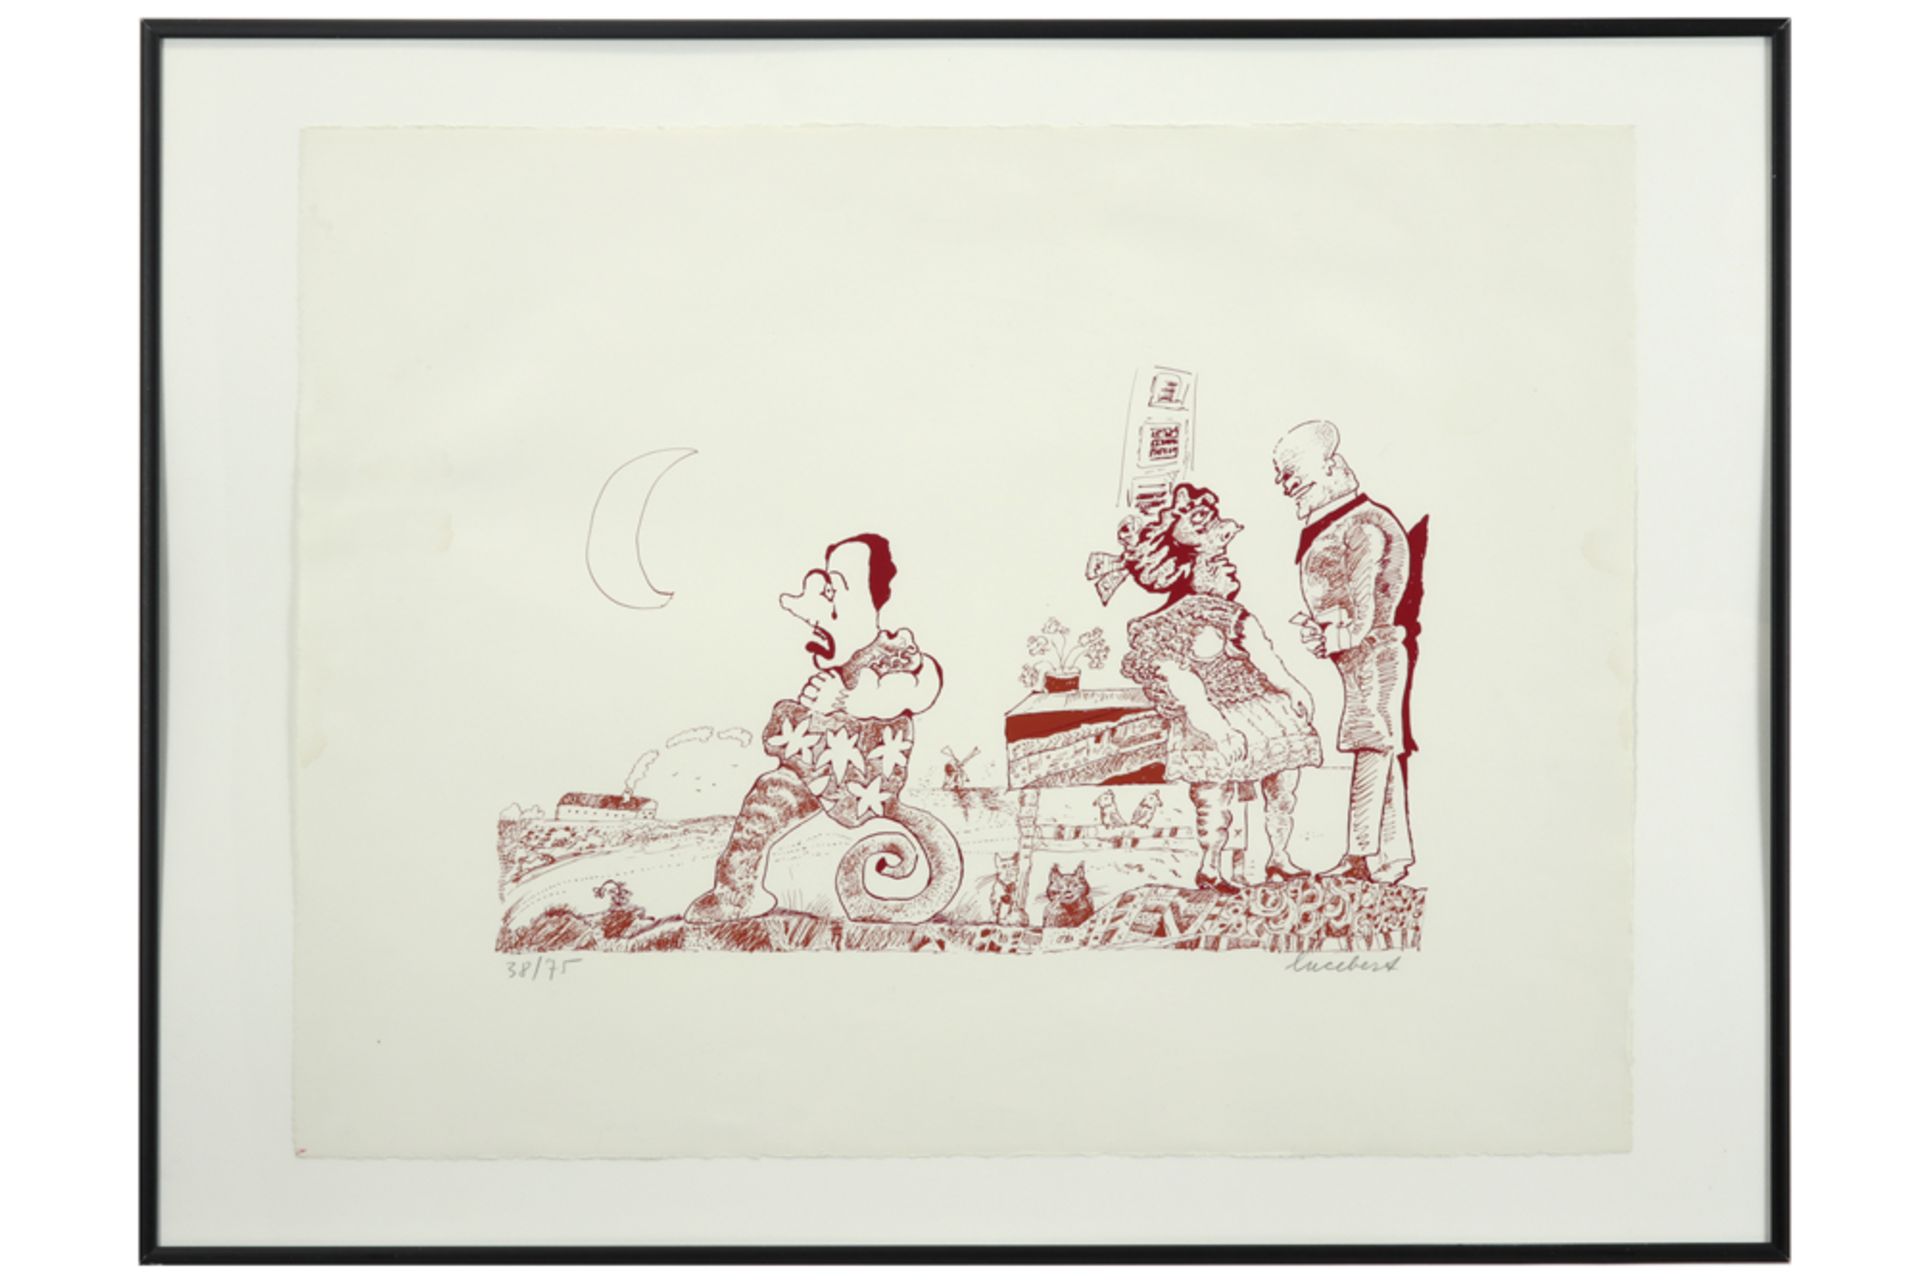 Lucebert signed lithograph with a typical composition with figures || LUCEBERT (1924 - 1994) litho - Image 3 of 3